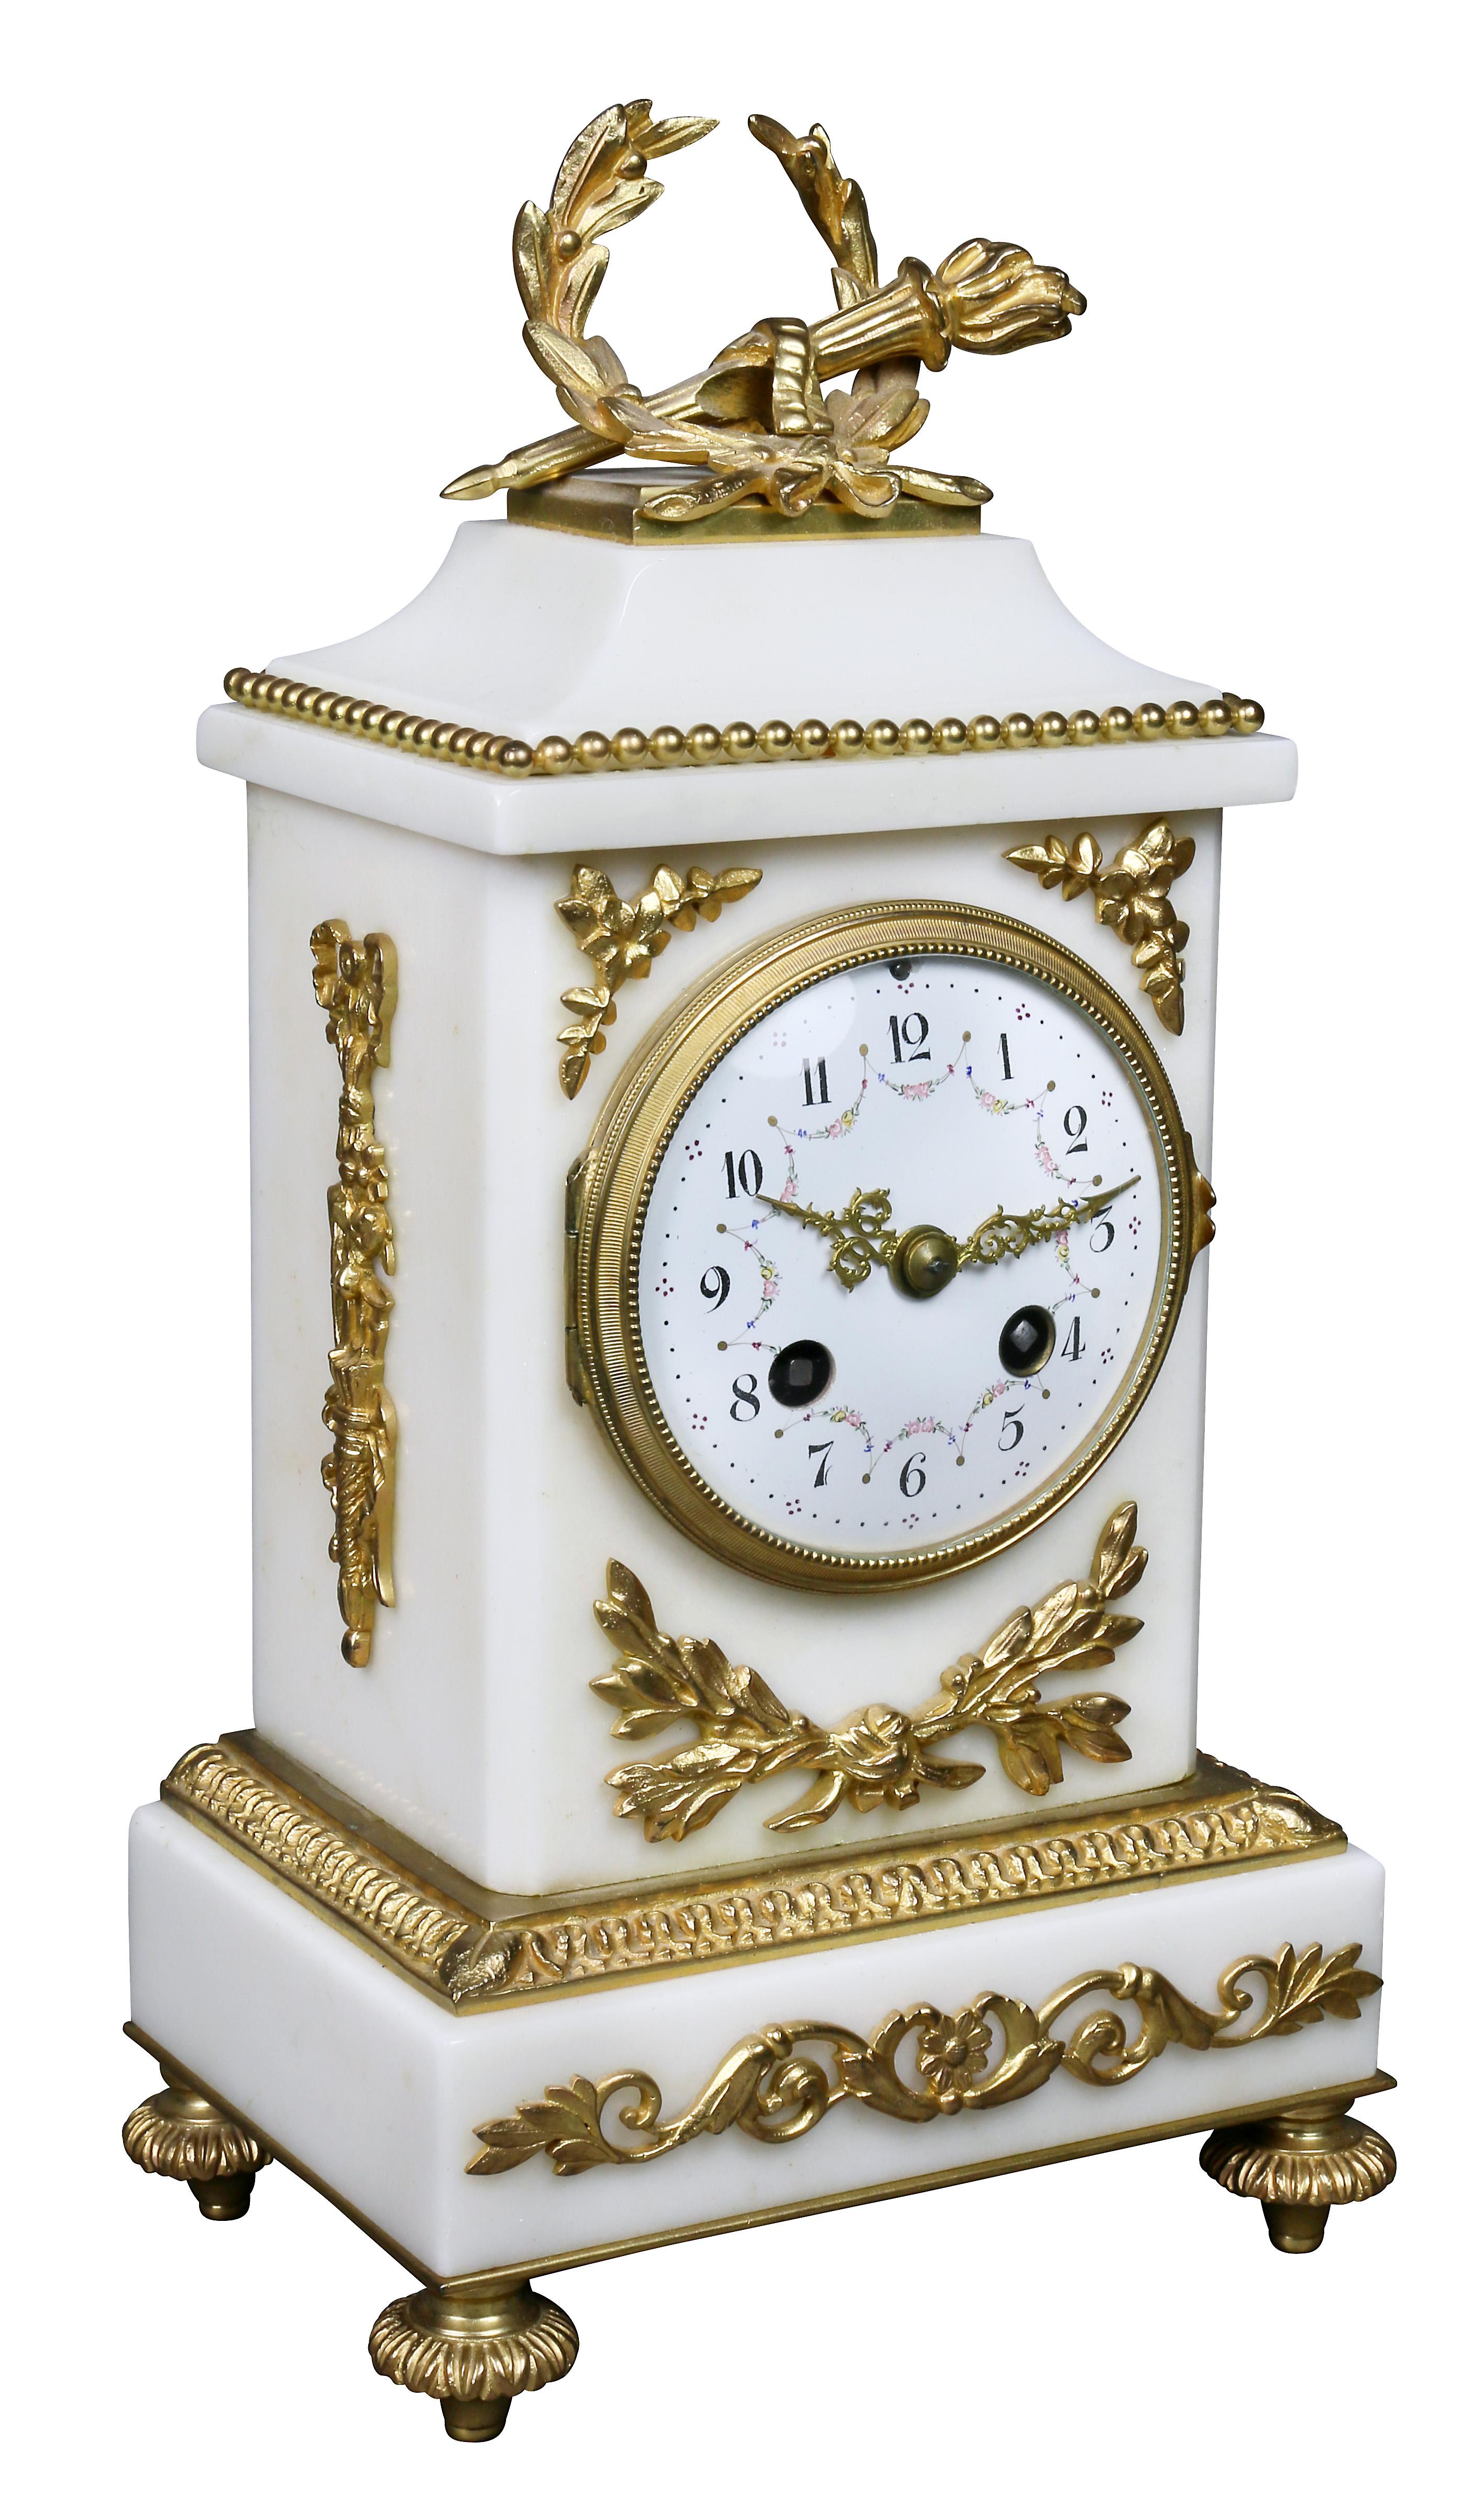 The clock with laurel wreath and torch finial over a clock set in a rectangular case, bronze feet. Together with a pair of two light candelabra.